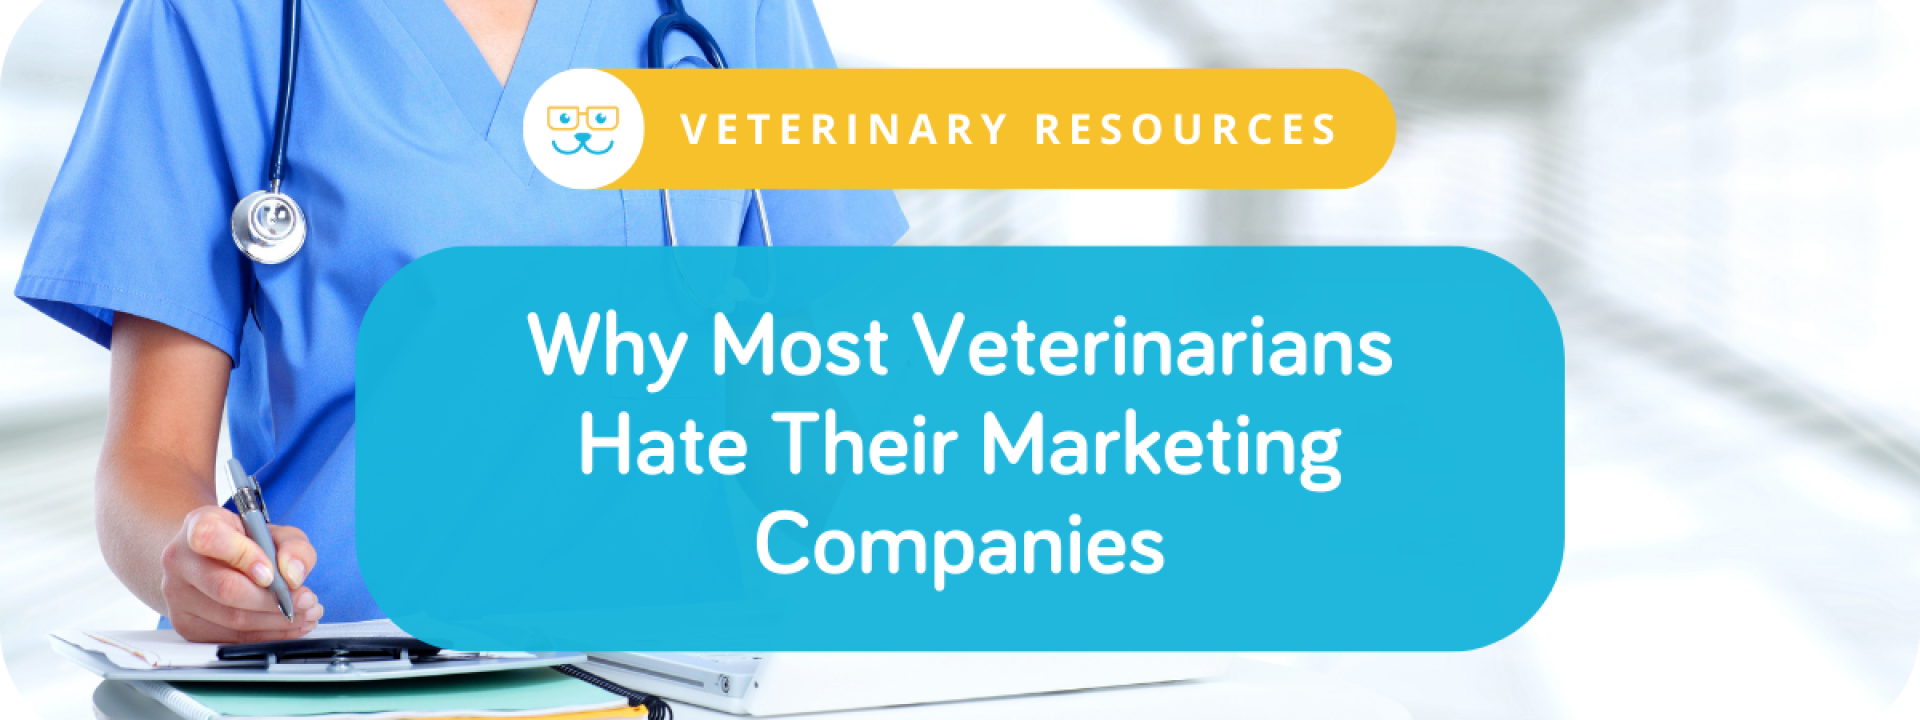 Why Most Veterinarians Hate Their Marketing Companies